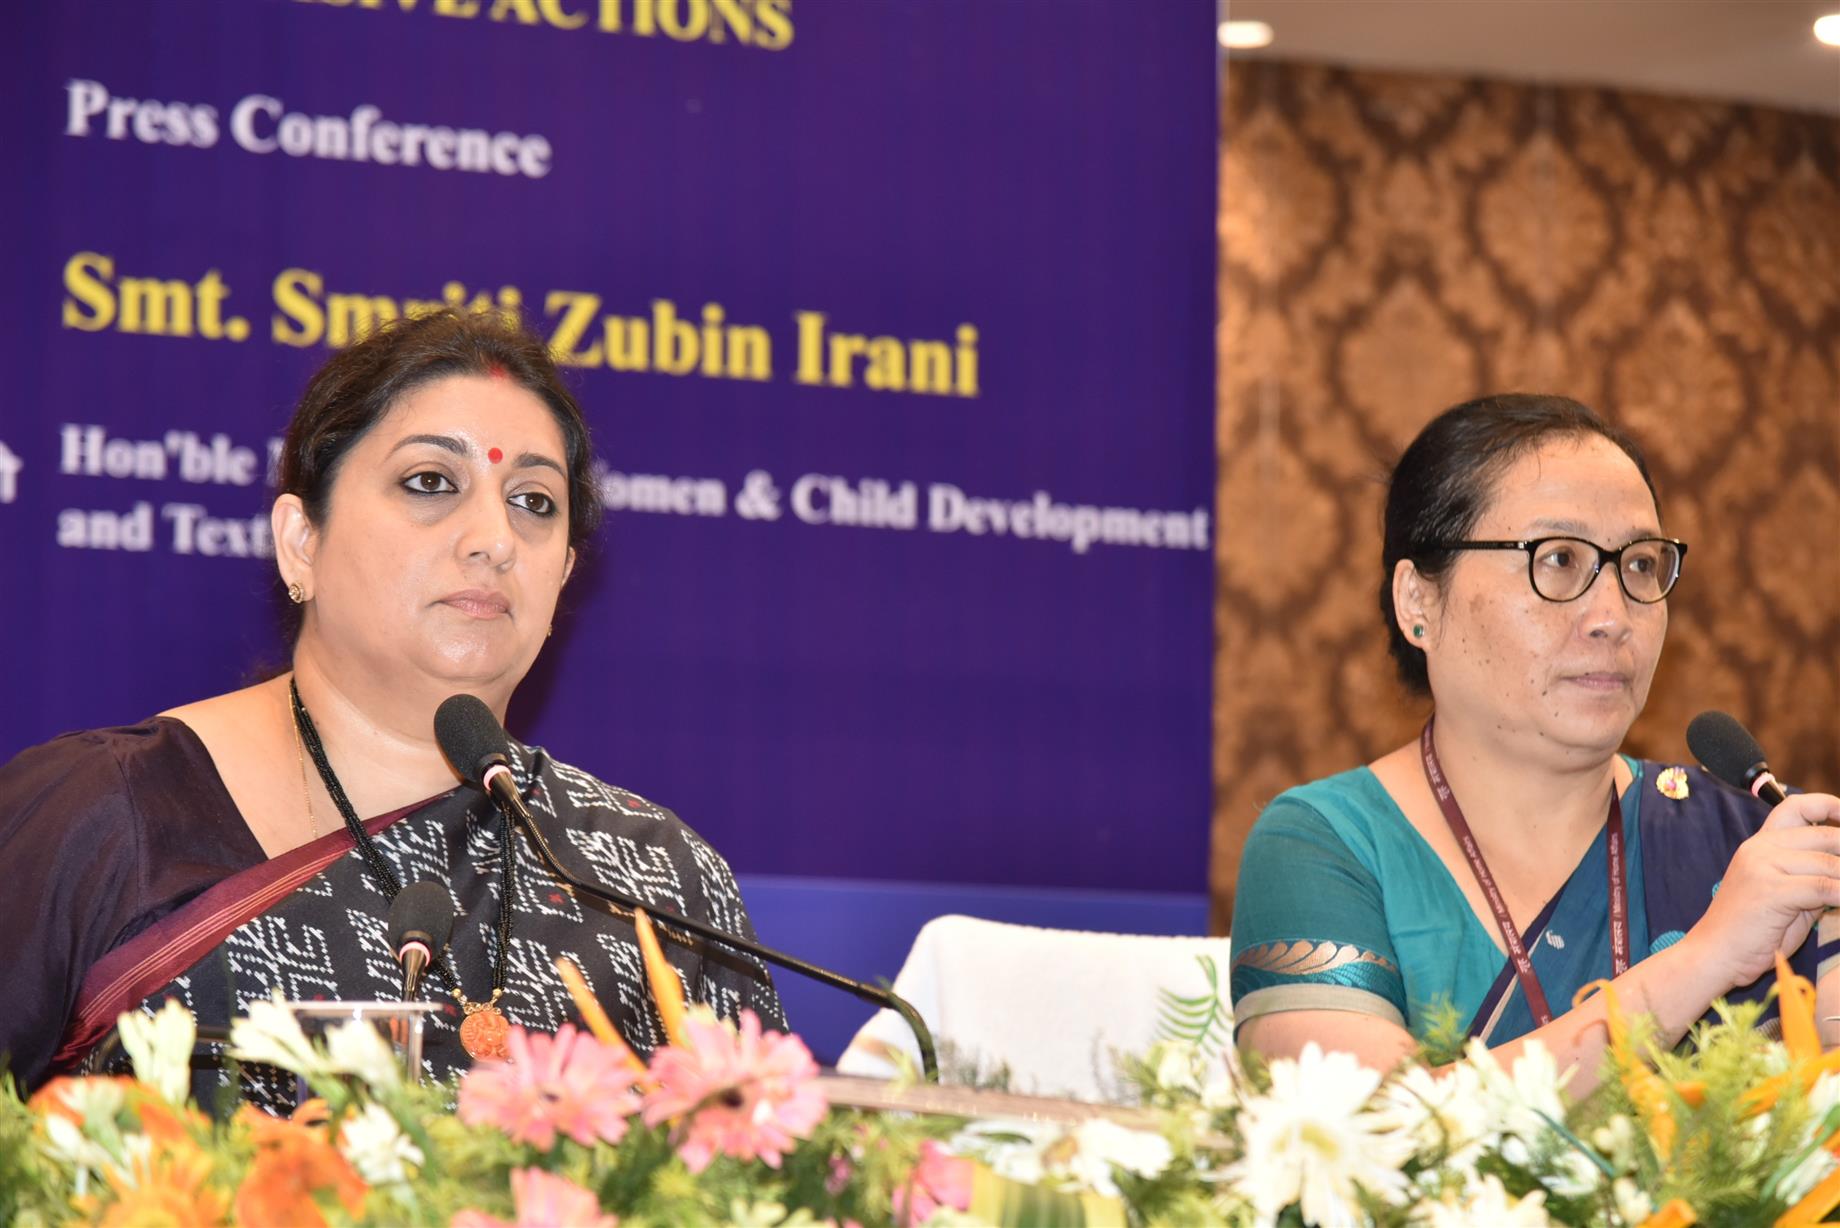 Union Minister for Women and Child Development and Textiles, Smt Smriti Zubin Irani at a press conference on the occasion of 100 days of Bold Initiatives and Decisive Actions taken by the Central Government  in Kolkata on September 10, 2019.